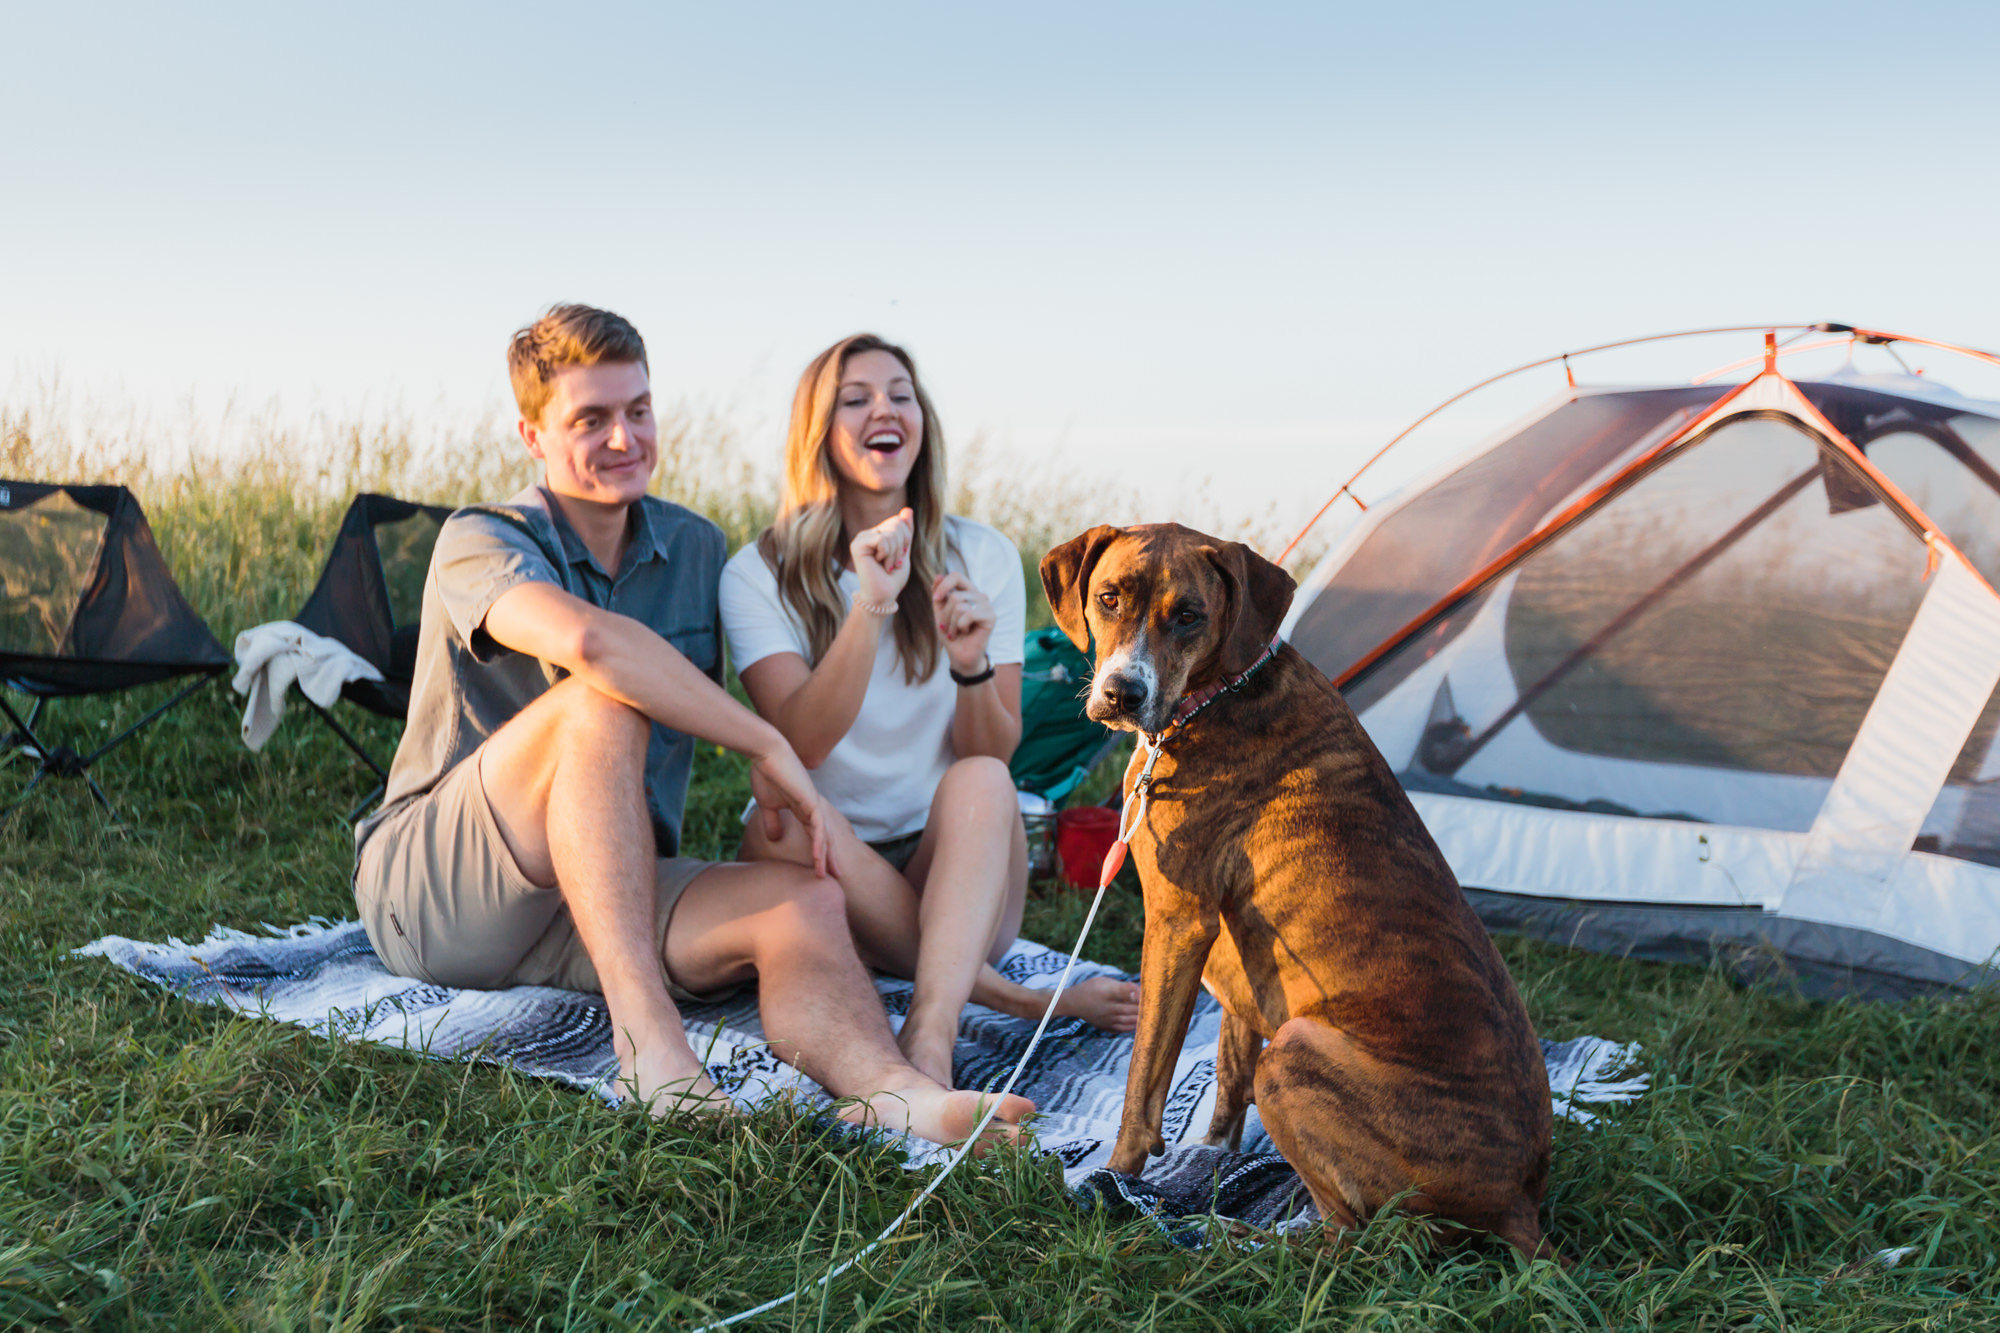 Guy and girl on blanket by tent with dog sitting in front, Nashville engagement, couples mountain, mountain engagement, couples camping, dog photography, Knoxville, couples hiking, camping with dog, North Carolina hiking, summer engagement photos, Tennessee Photography, Tennessee Photographer, Tennessee Photos, Tennessee Engagement Photography, Tennessee Engagement Photos, Tennessee Engagement Photographer, Tennessee Portrait Photographer, Nashville Engagement Photographer, Nashville Engagement Photos, Knoxville Engagement, Nashville Lifestyle Photographer, Nashville Lifestyle Photography, Nashville Lifestyle Photos, Creative Portraits